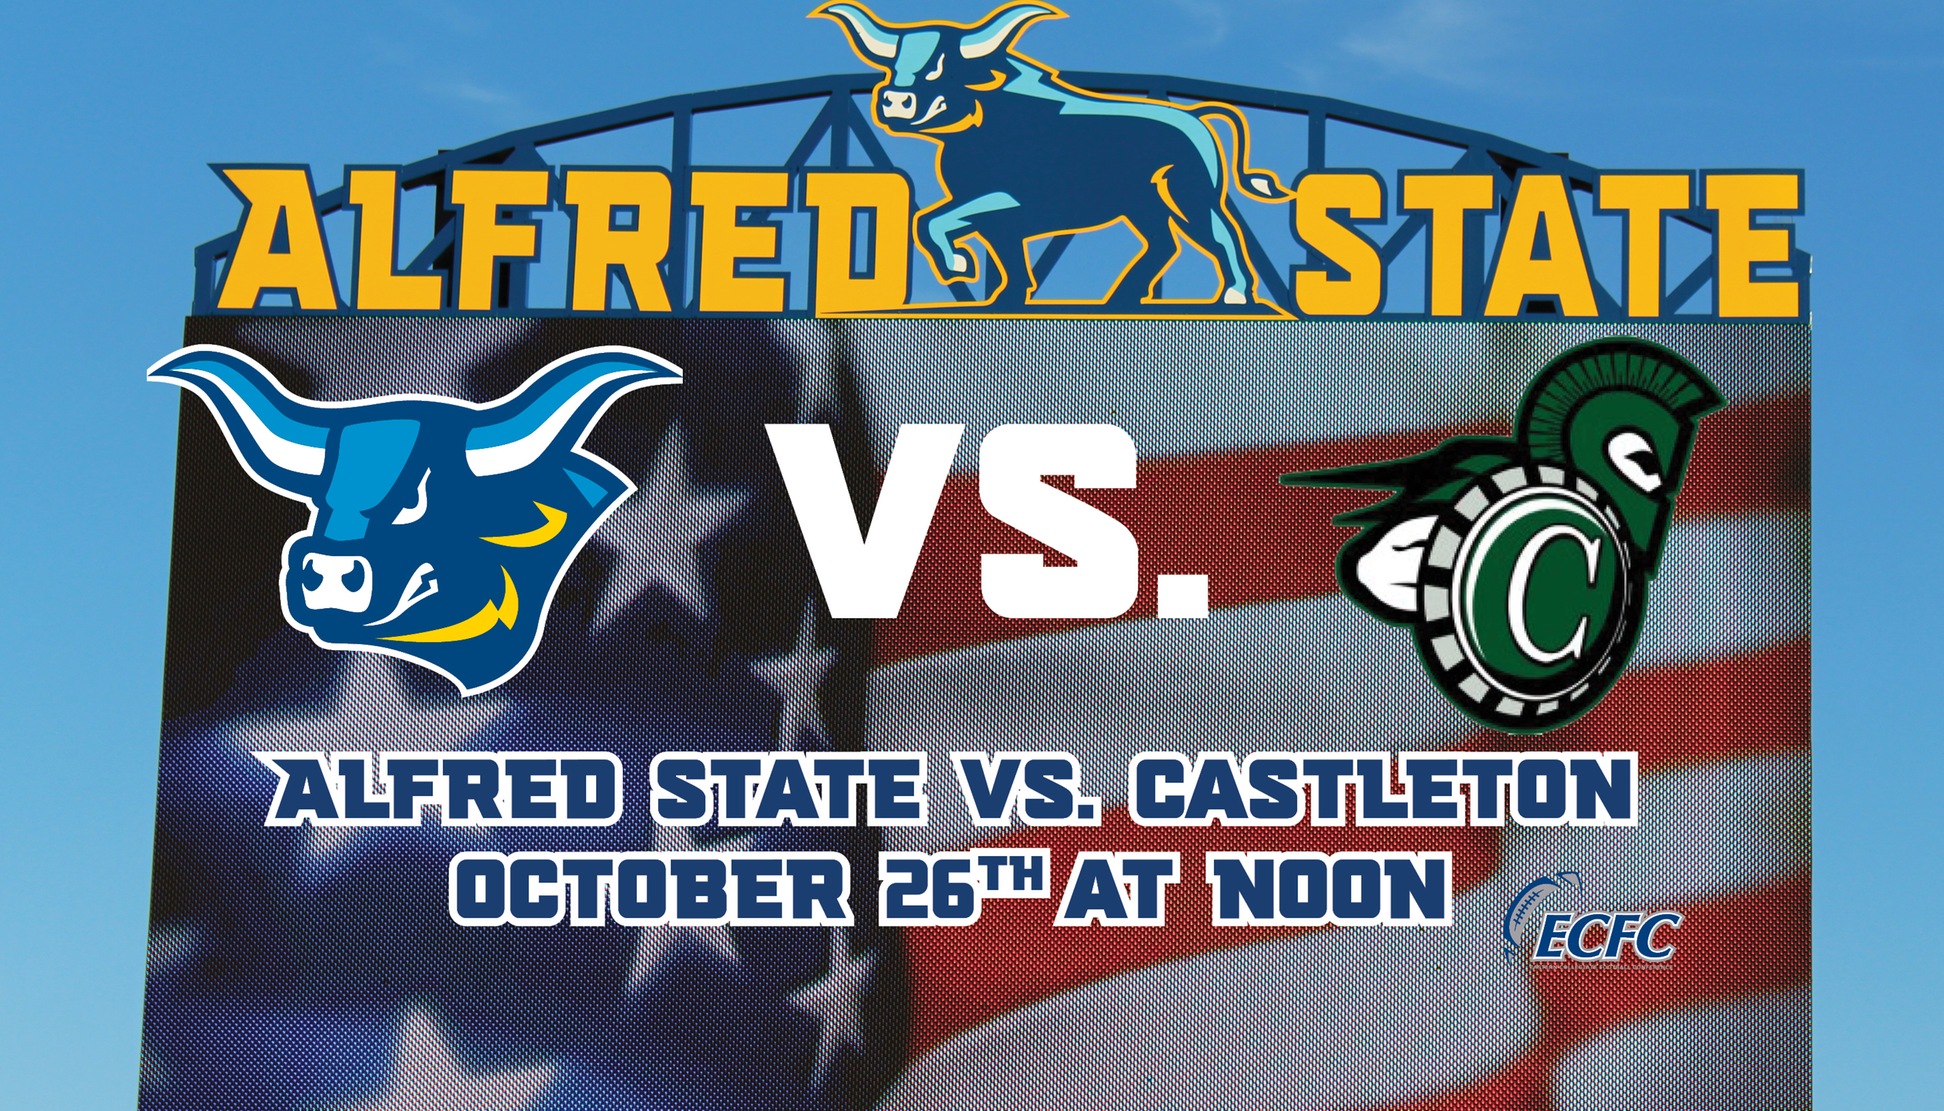 Alfred State takes on Castleton as they continue the Pioneers continue the ECFC schedule.